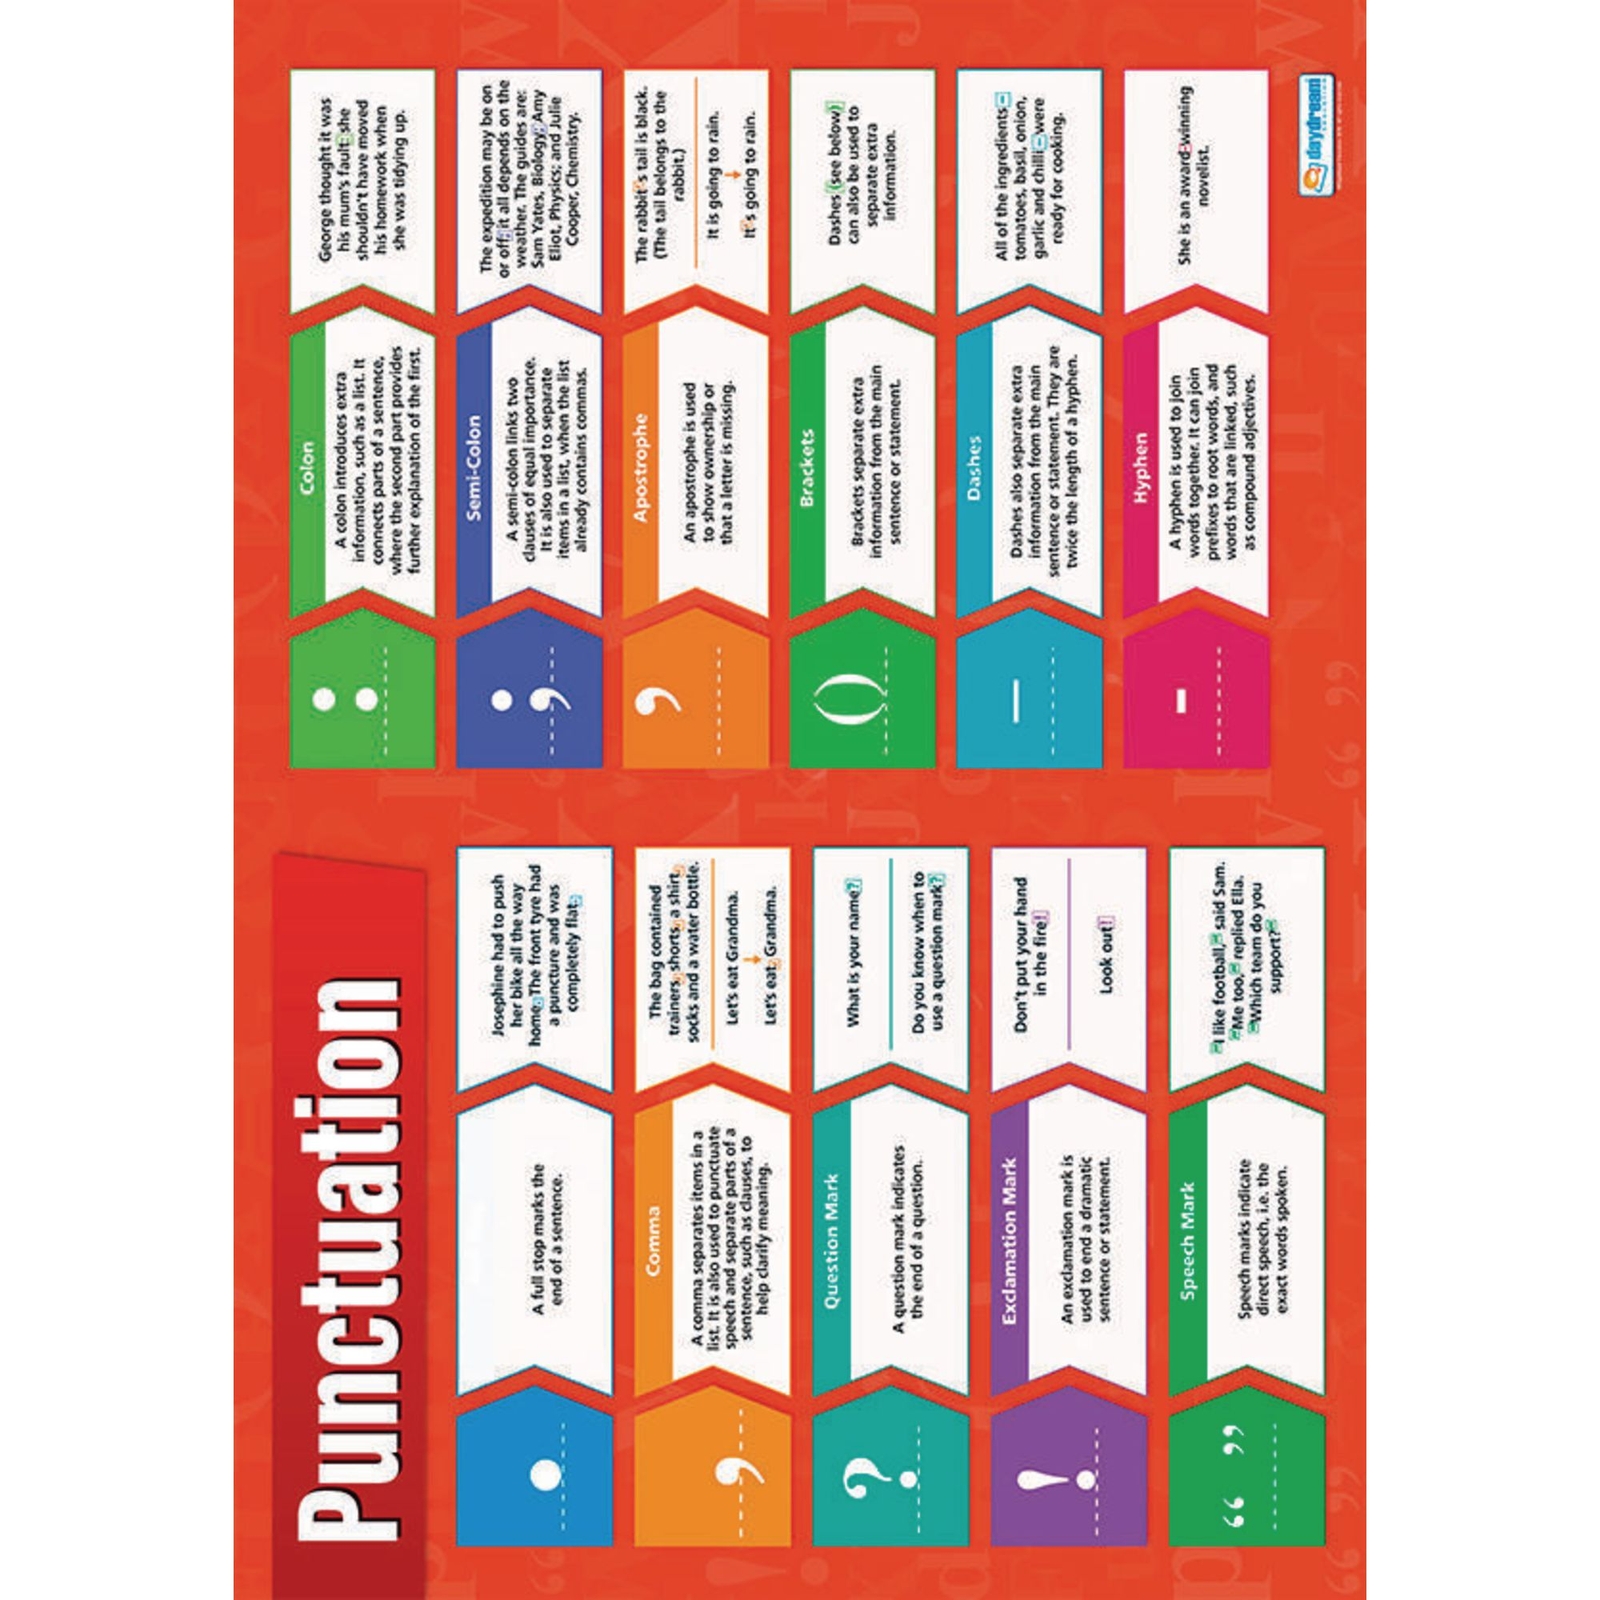 Punctuation Poster - A1/841 x 594mm - Each